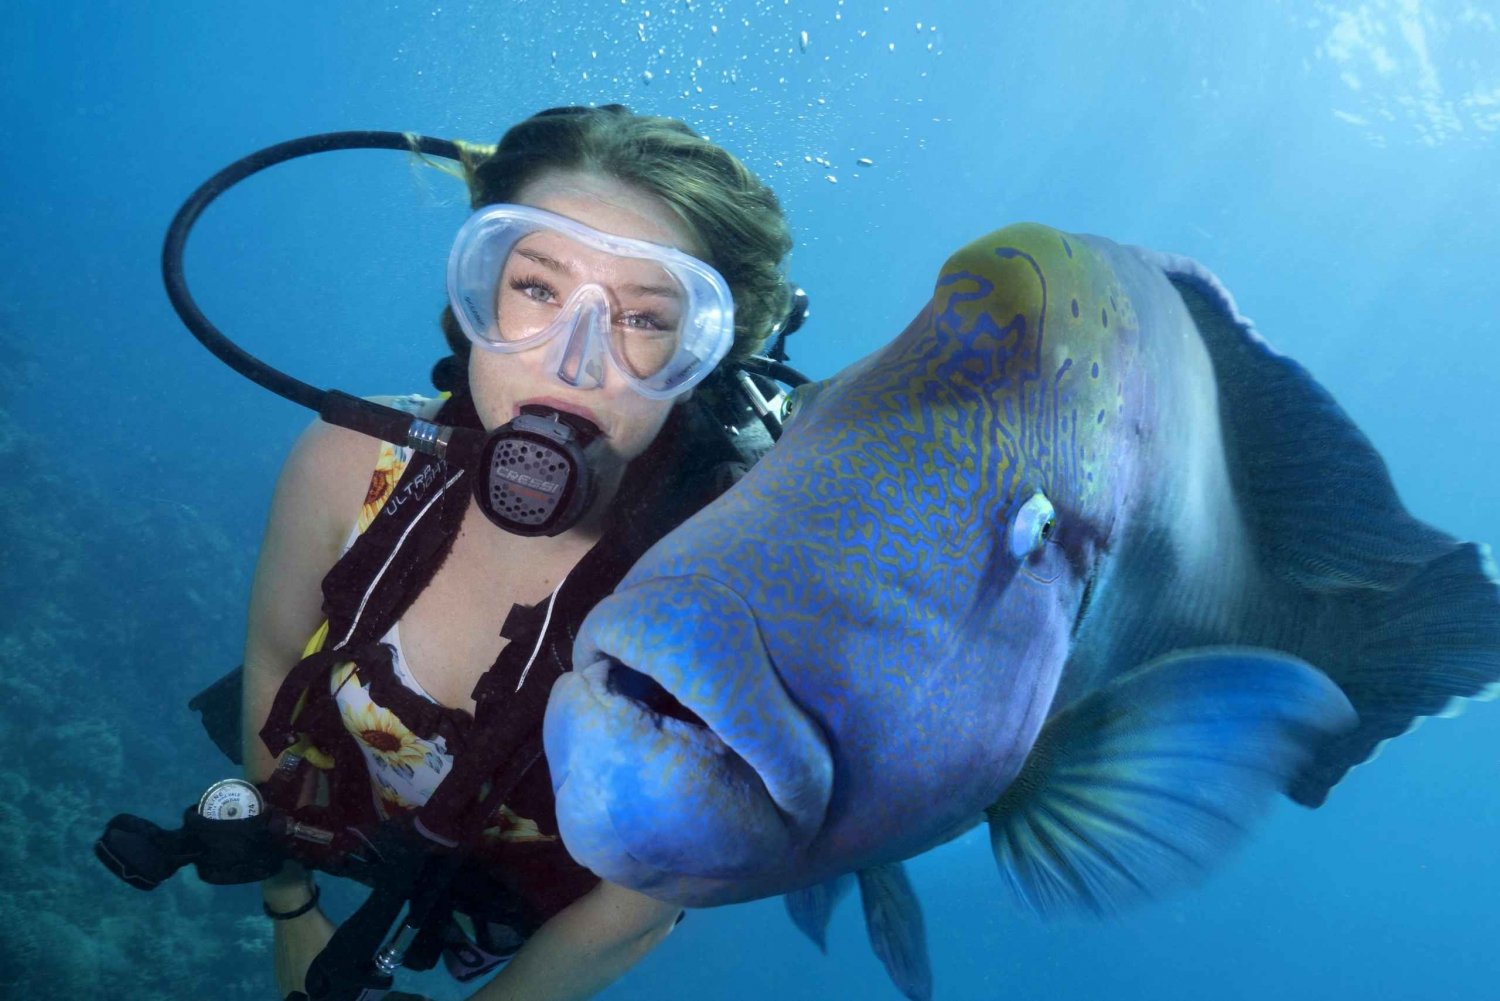 Cairns: Great Barrier Reef Snorkeling or Dive Tour and Lunch